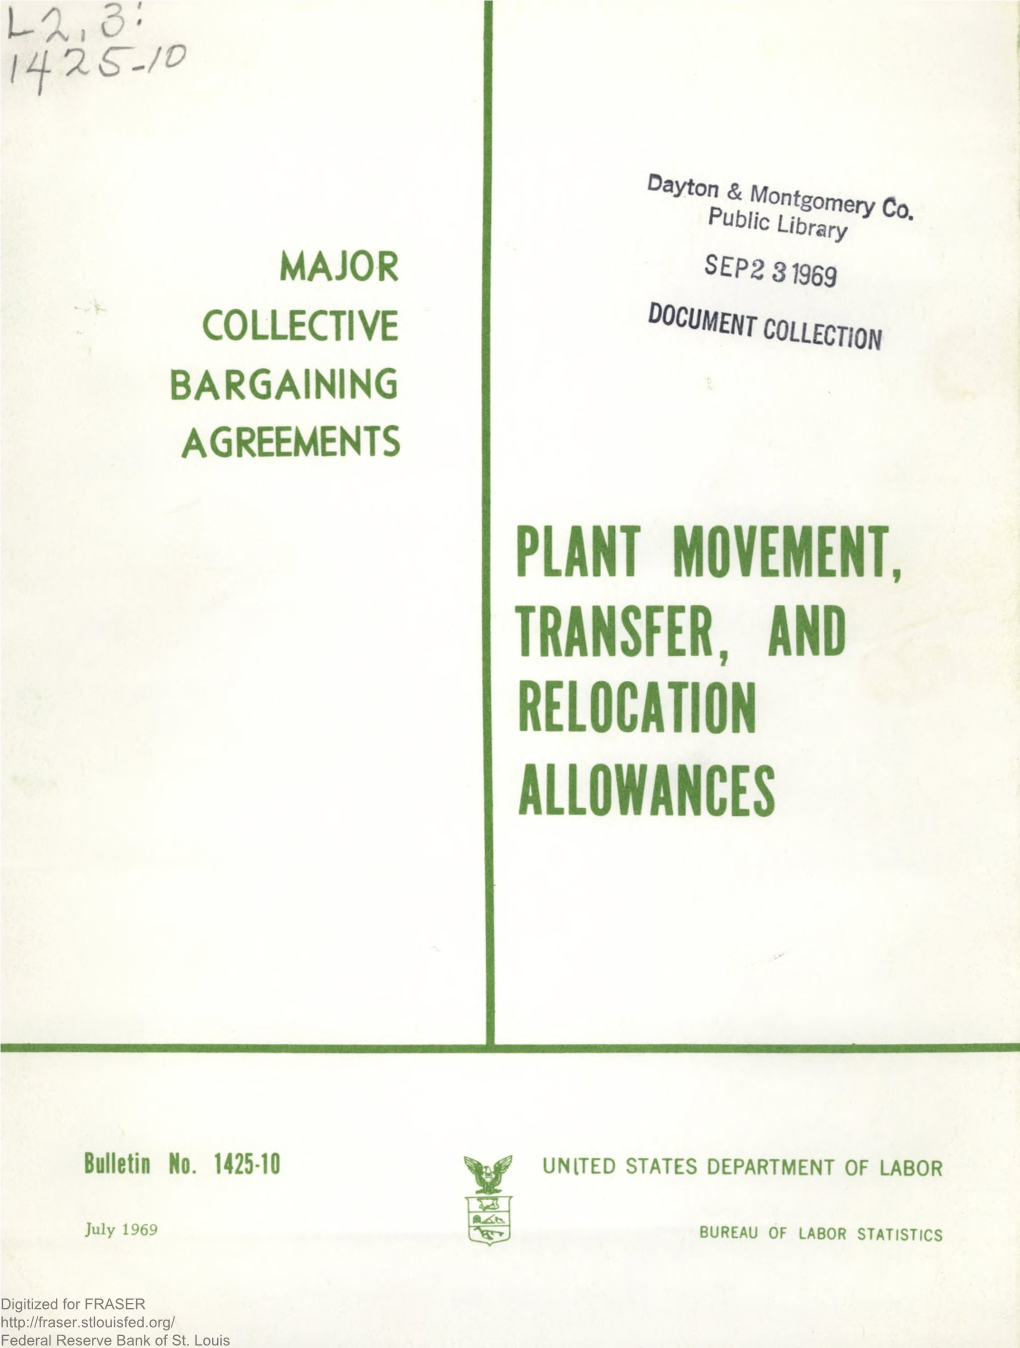 Plant Movement, Transfer, and Relocation Allowances